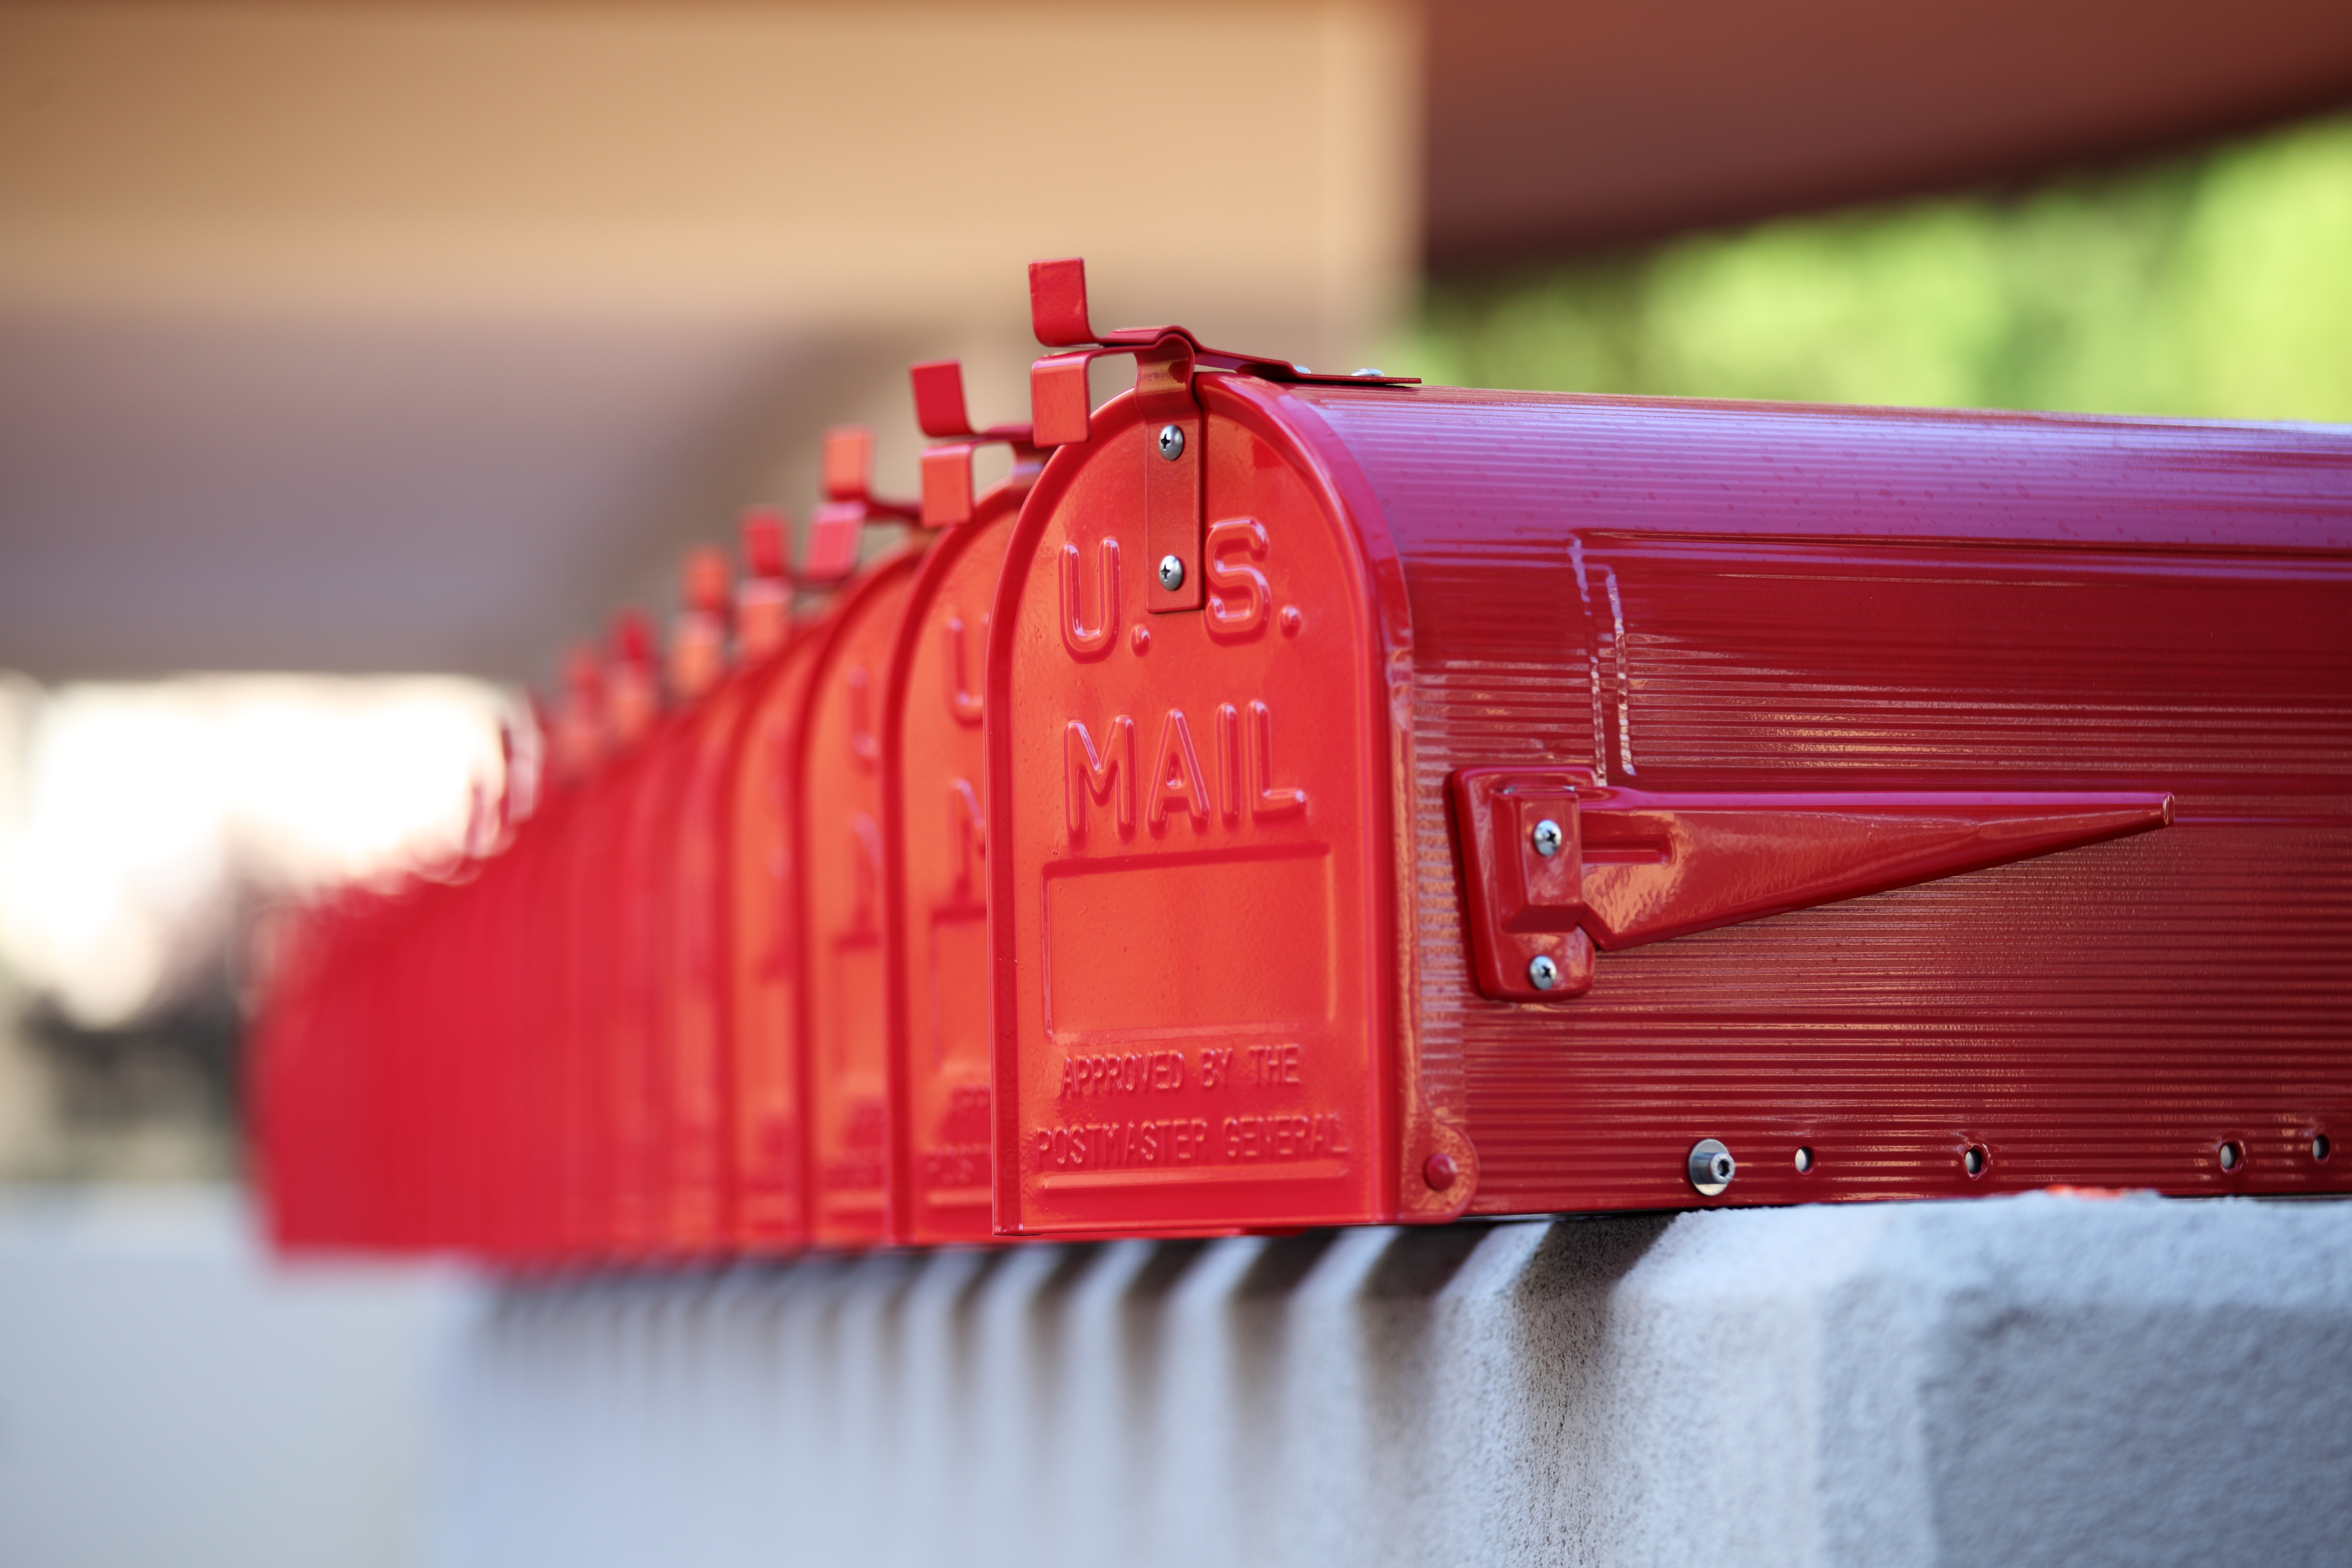 A long row of shiny red mail boxes with U.S. Mail written on the front of them.